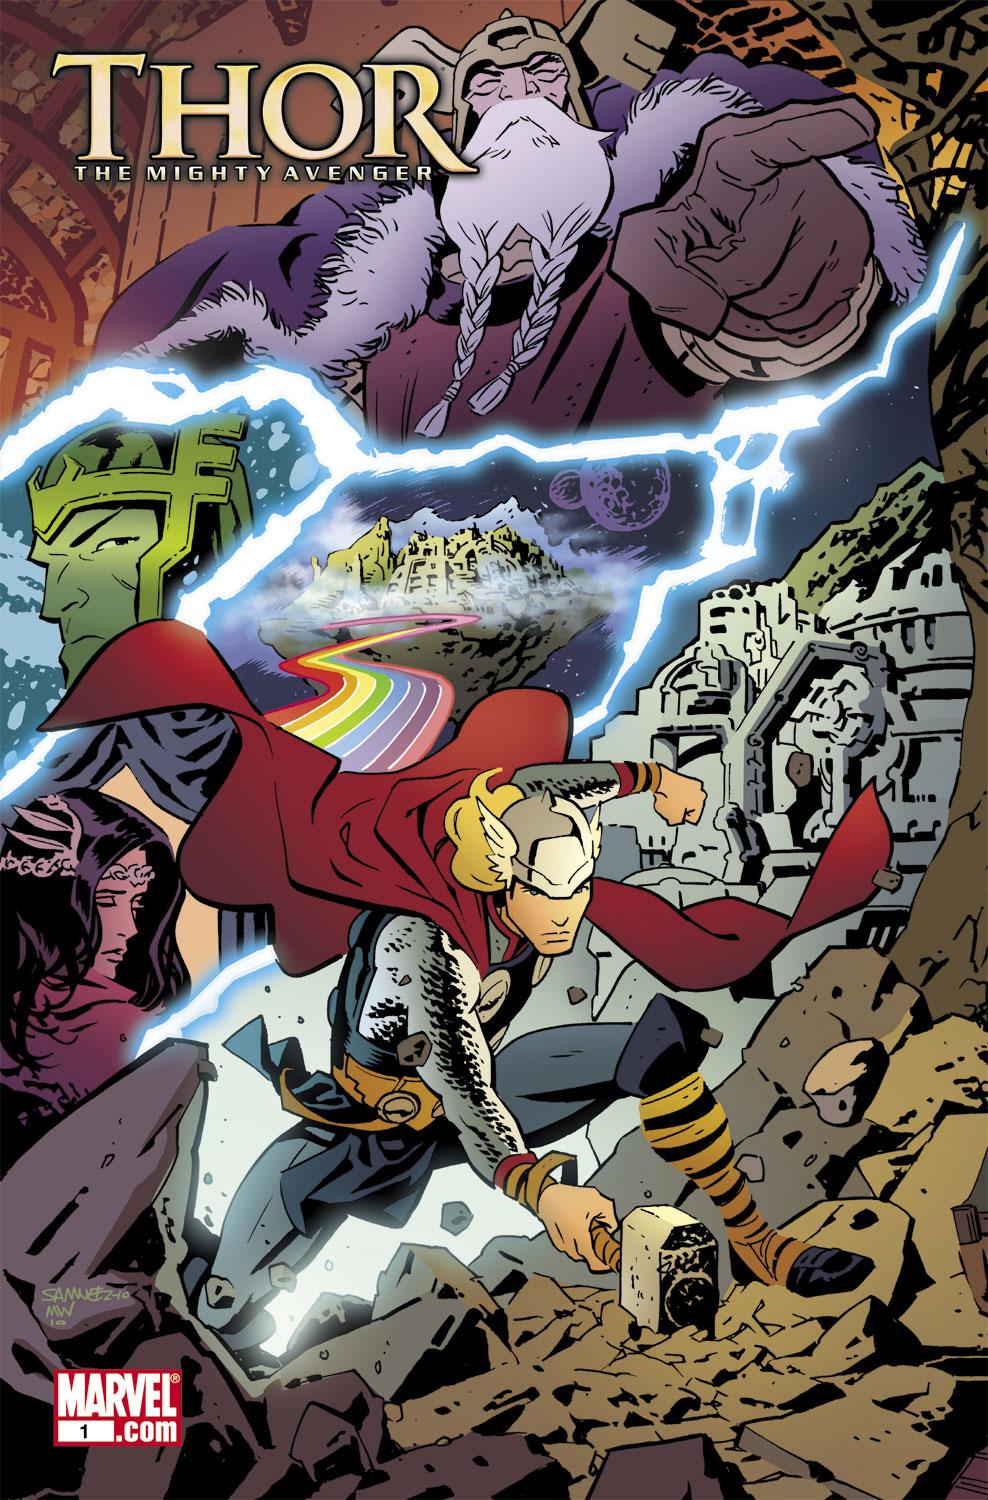 Thor the Mighty Avenger (2010) #1